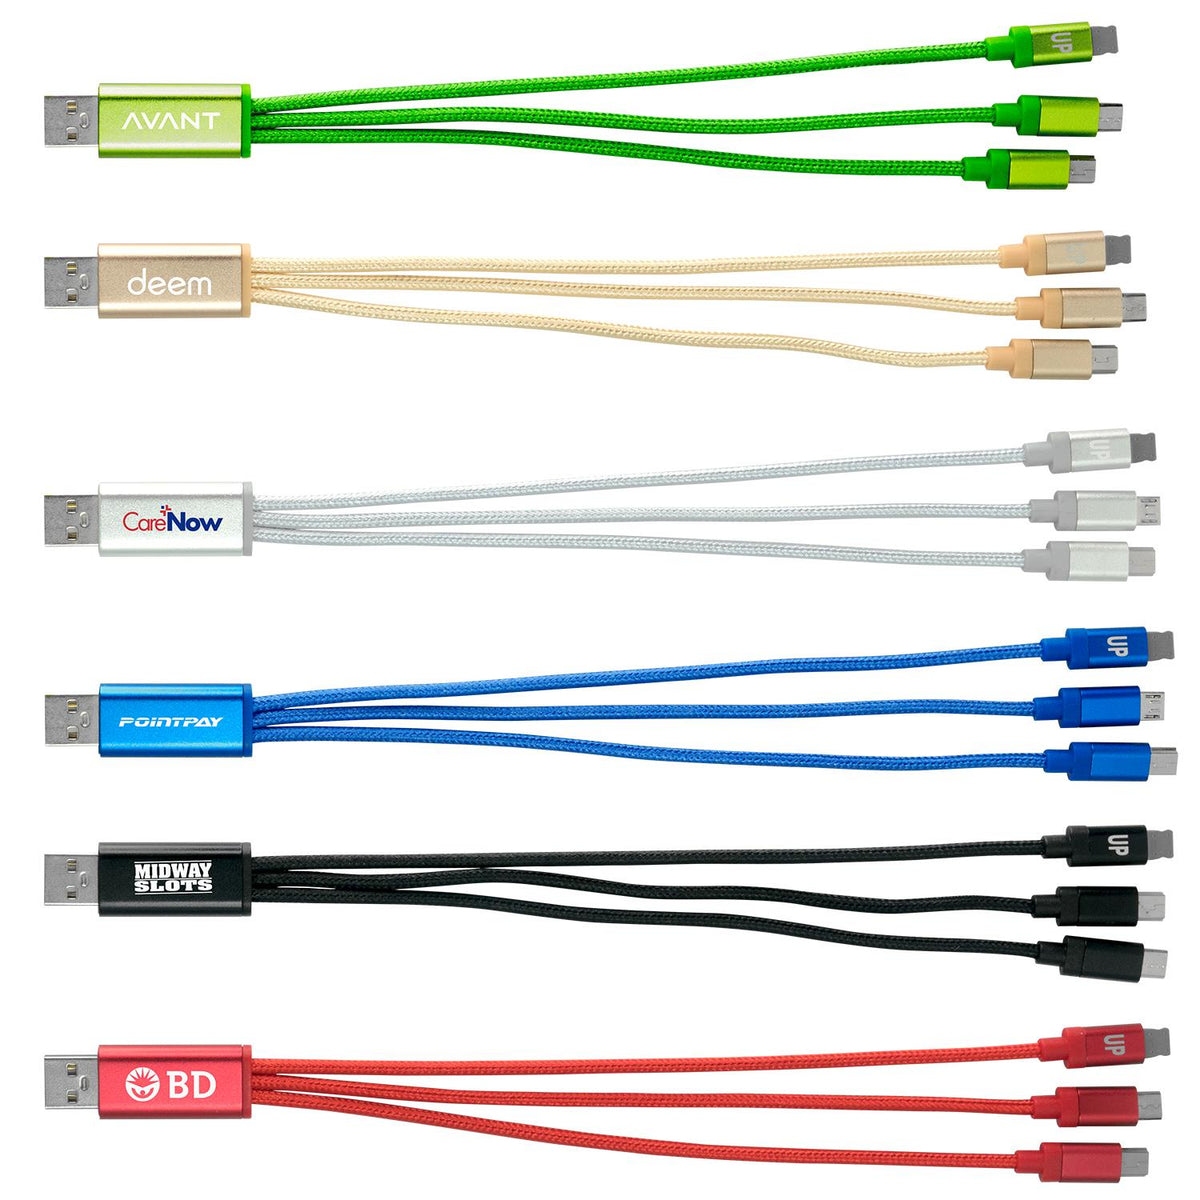 Metallic 3 in 1 Charging Cable